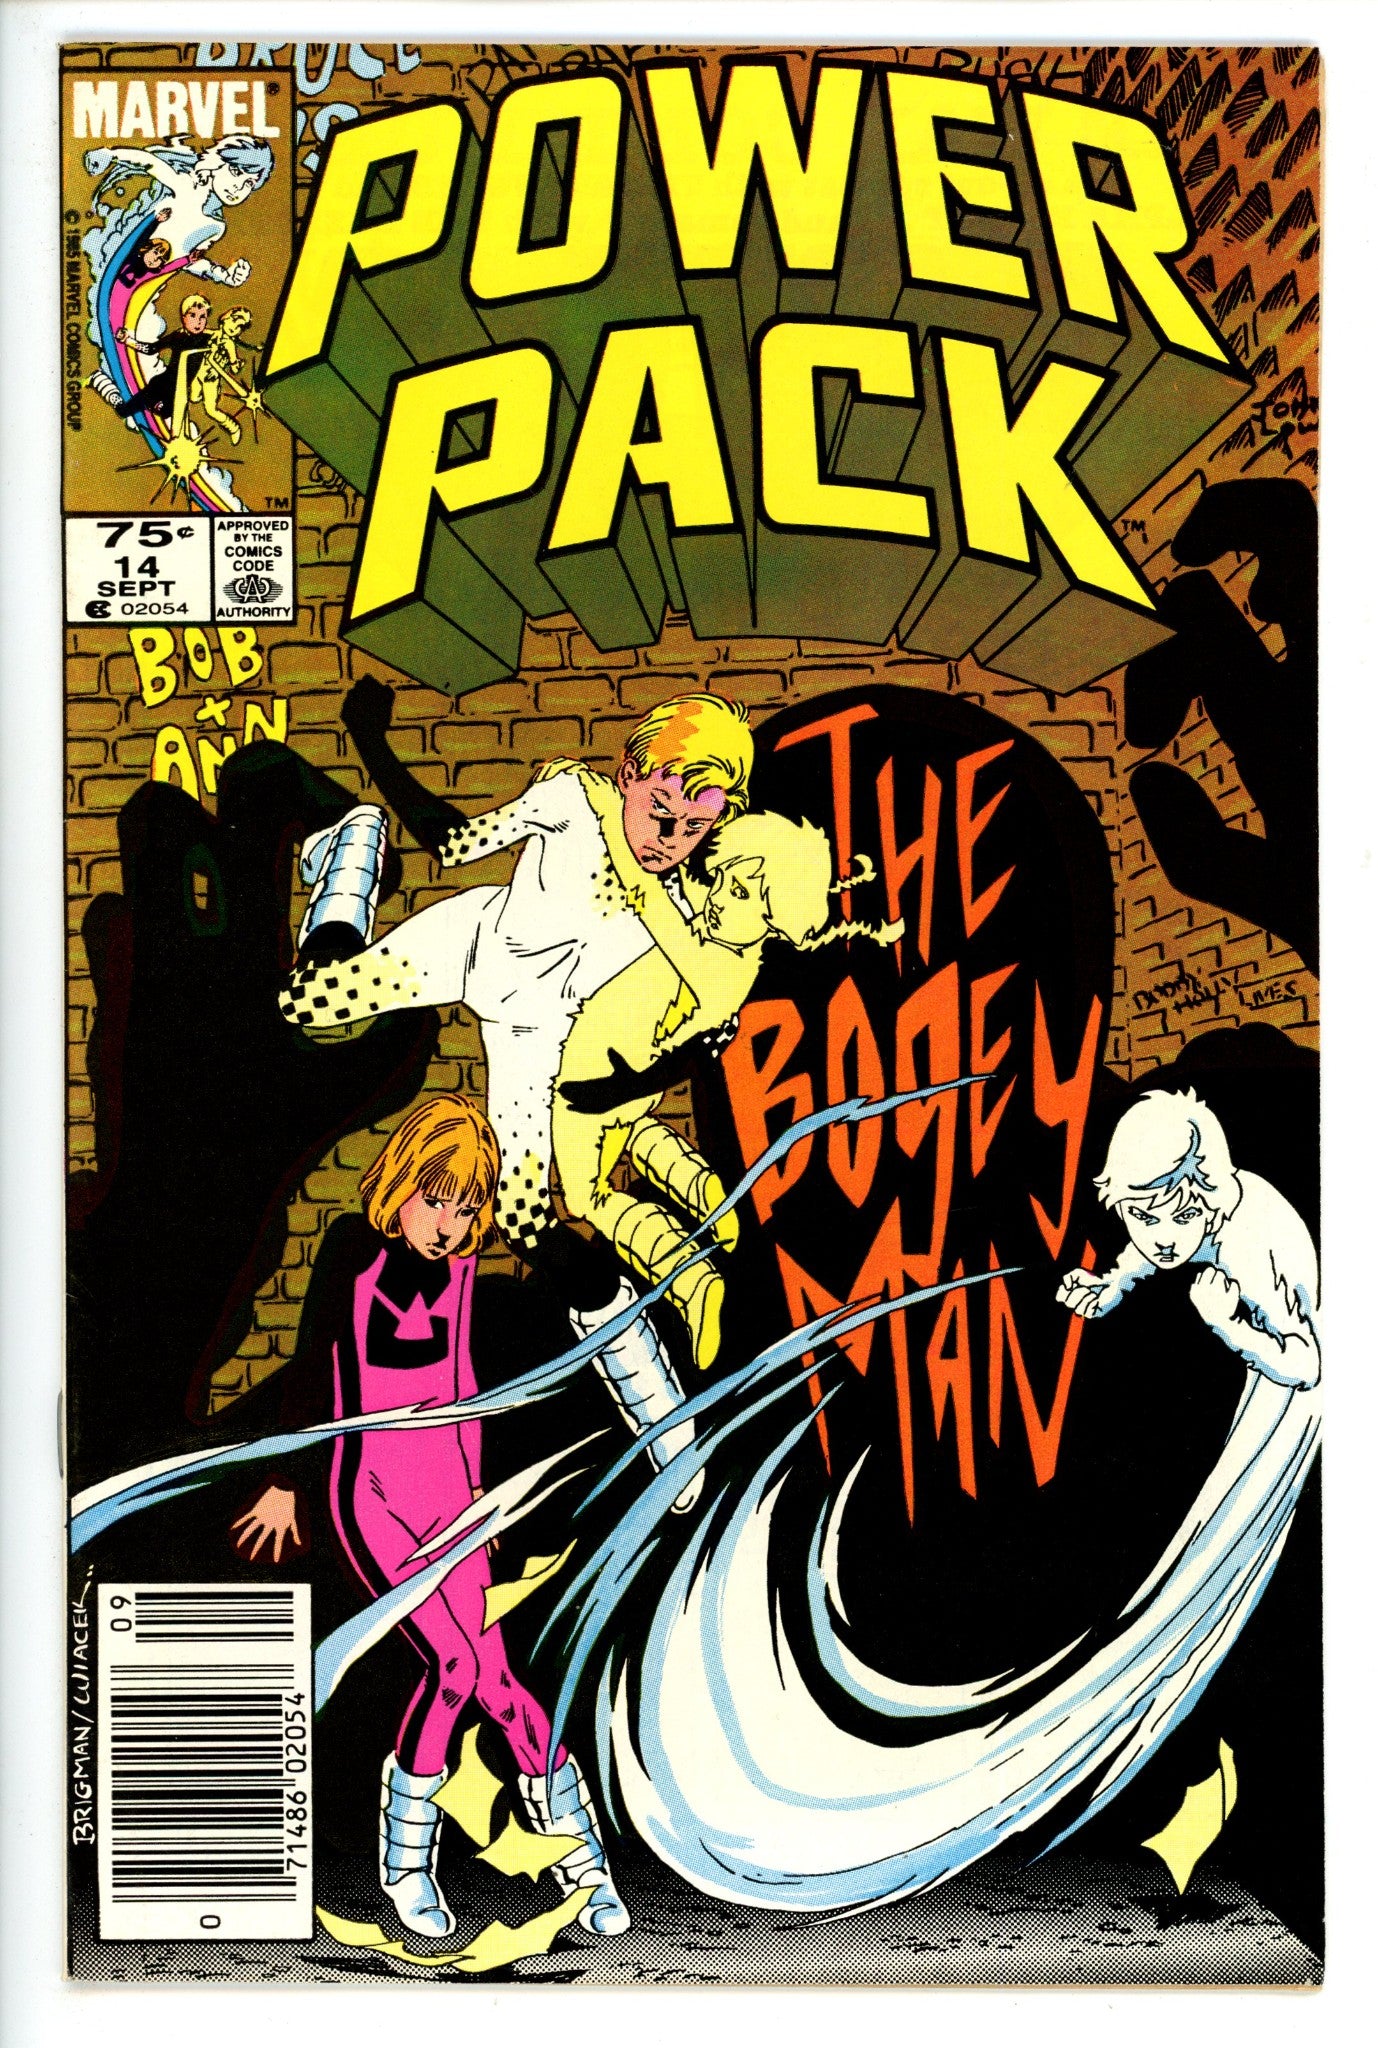 Power Pack Vol 1 14 Canadian VF